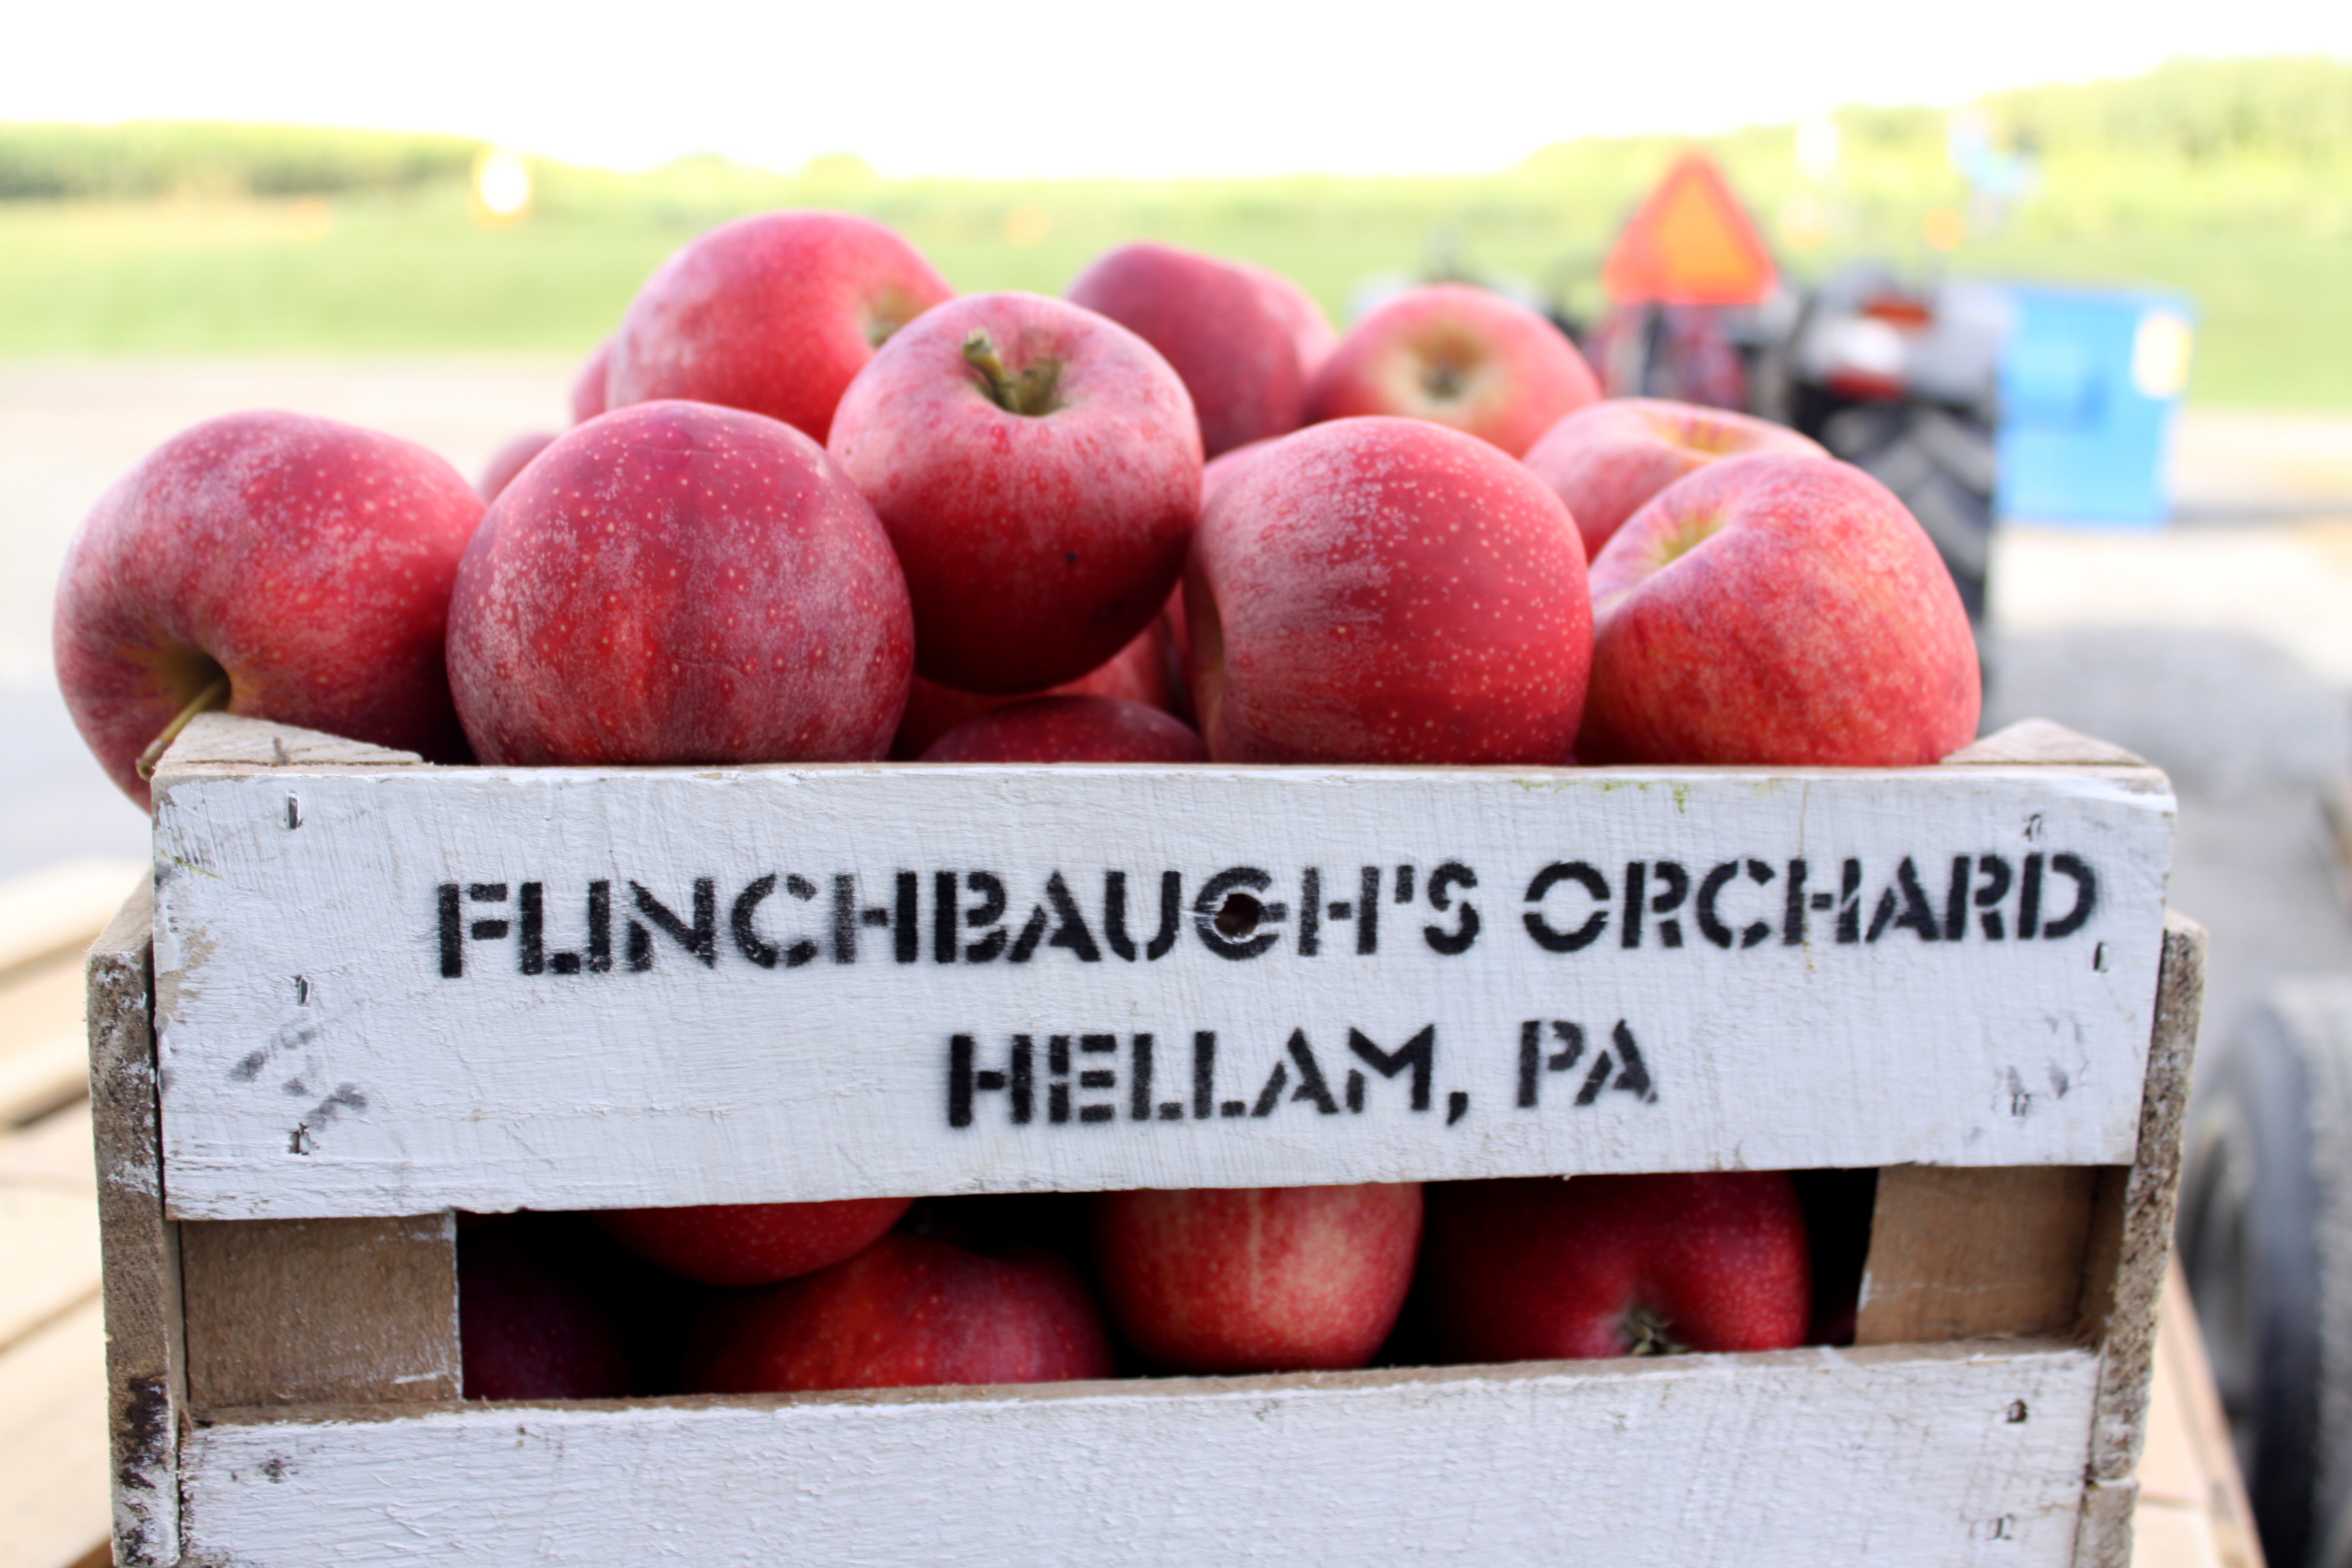 Gala apples just picked from the orchard at Flinchbaugh's Orchard & Farm Market.